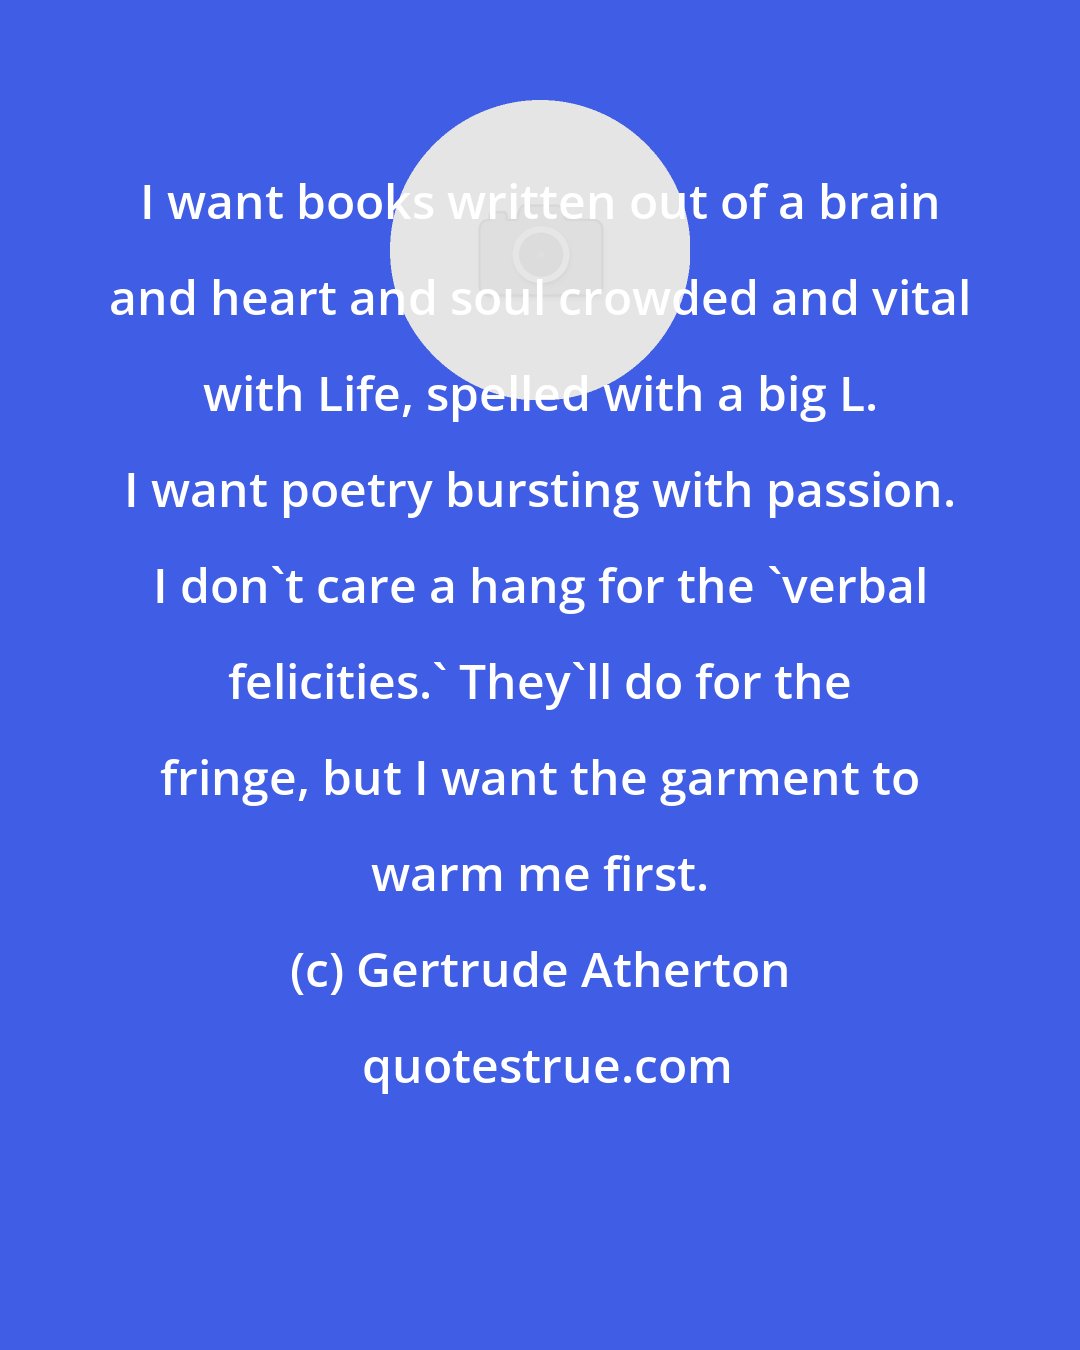 Gertrude Atherton: I want books written out of a brain and heart and soul crowded and vital with Life, spelled with a big L. I want poetry bursting with passion. I don't care a hang for the 'verbal felicities.' They'll do for the fringe, but I want the garment to warm me first.